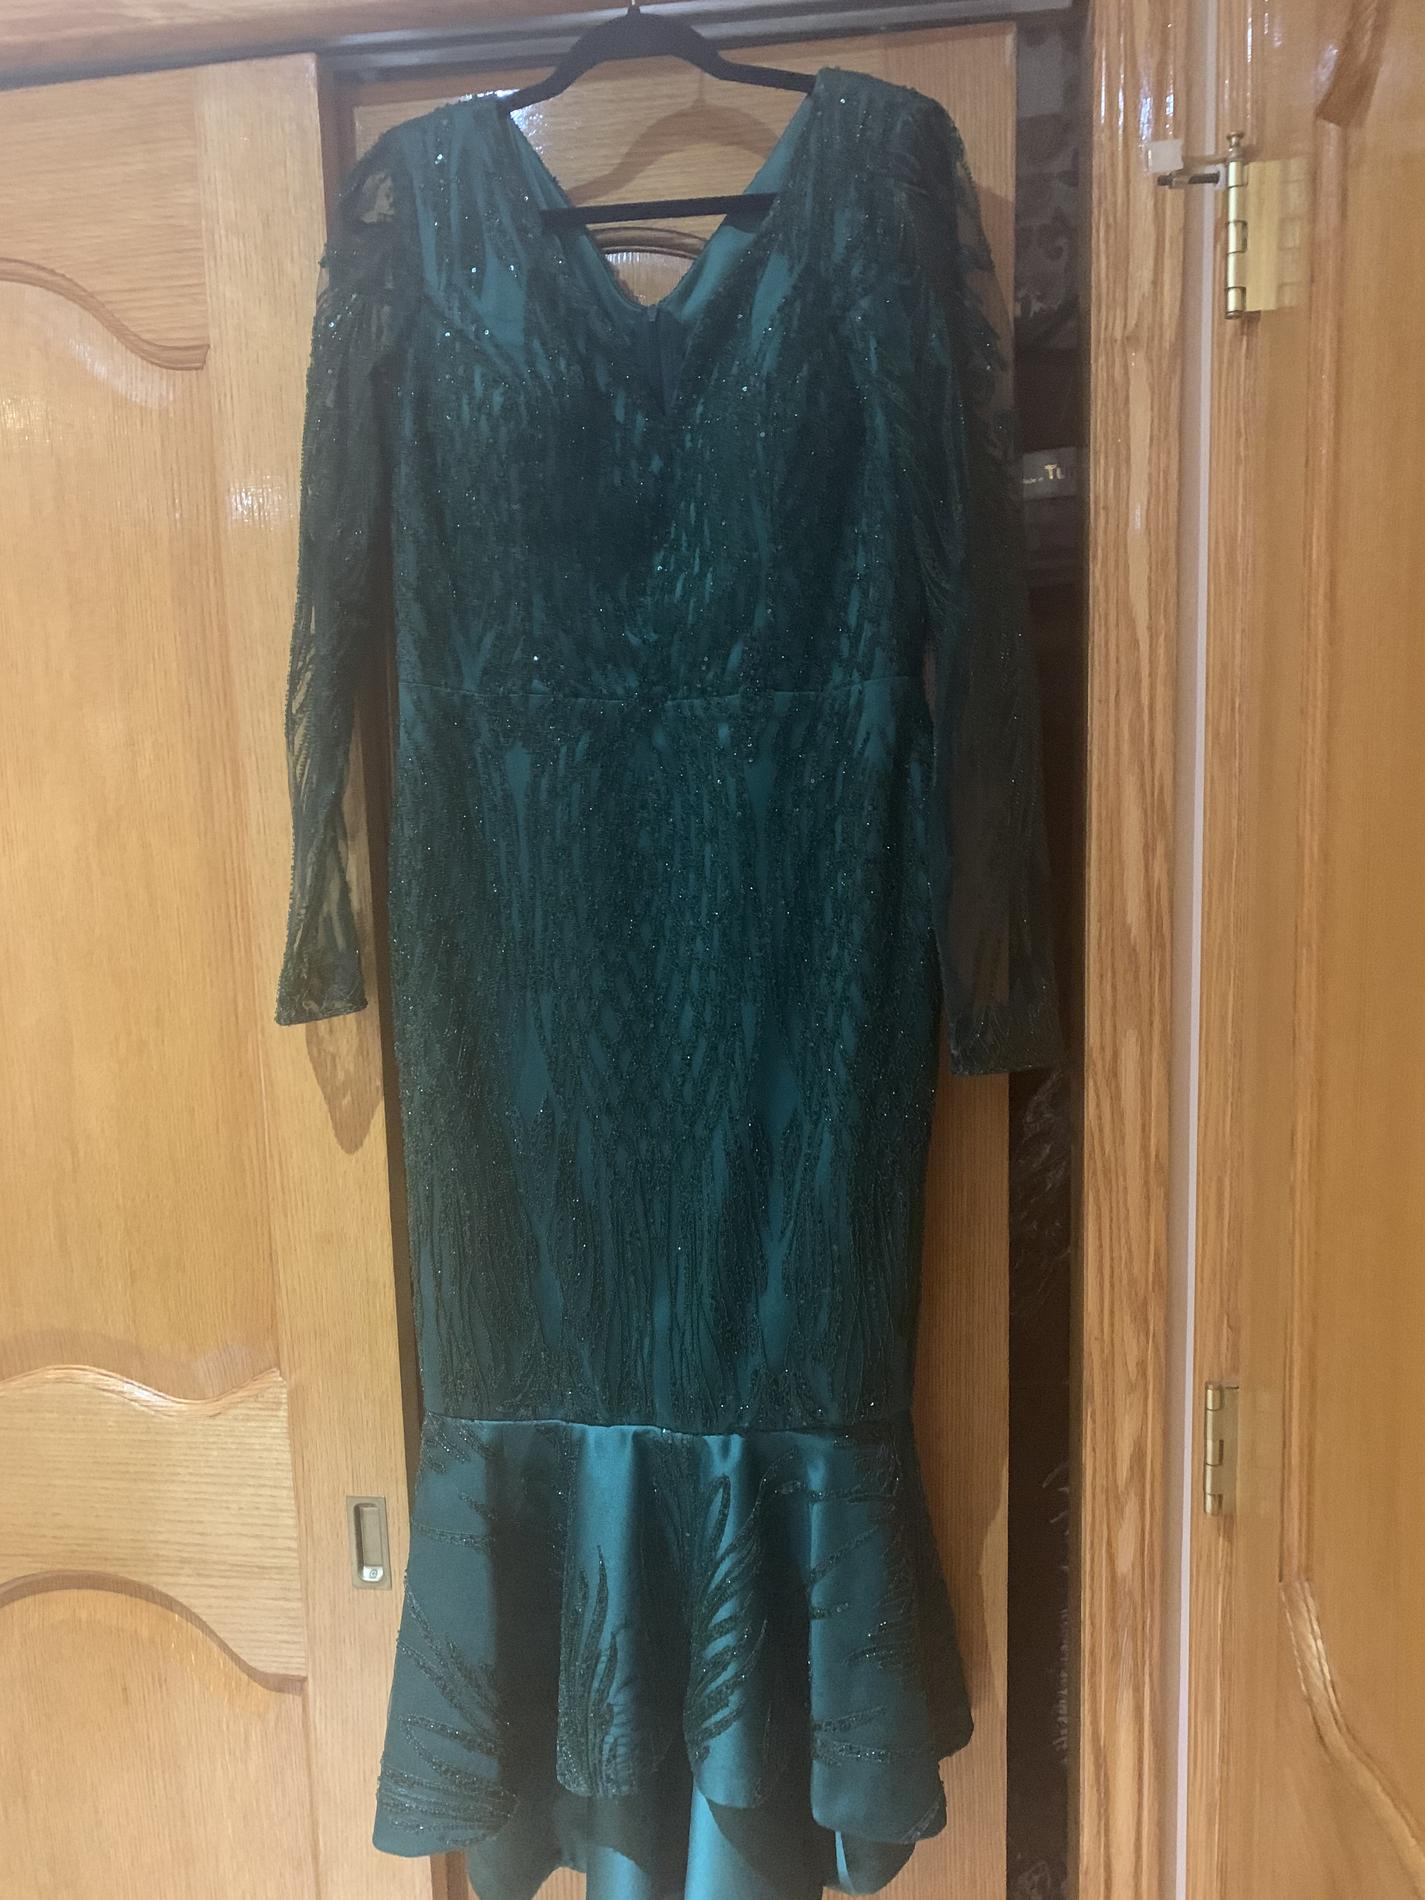 Green Size 12 Mermaid Dress on Queenly